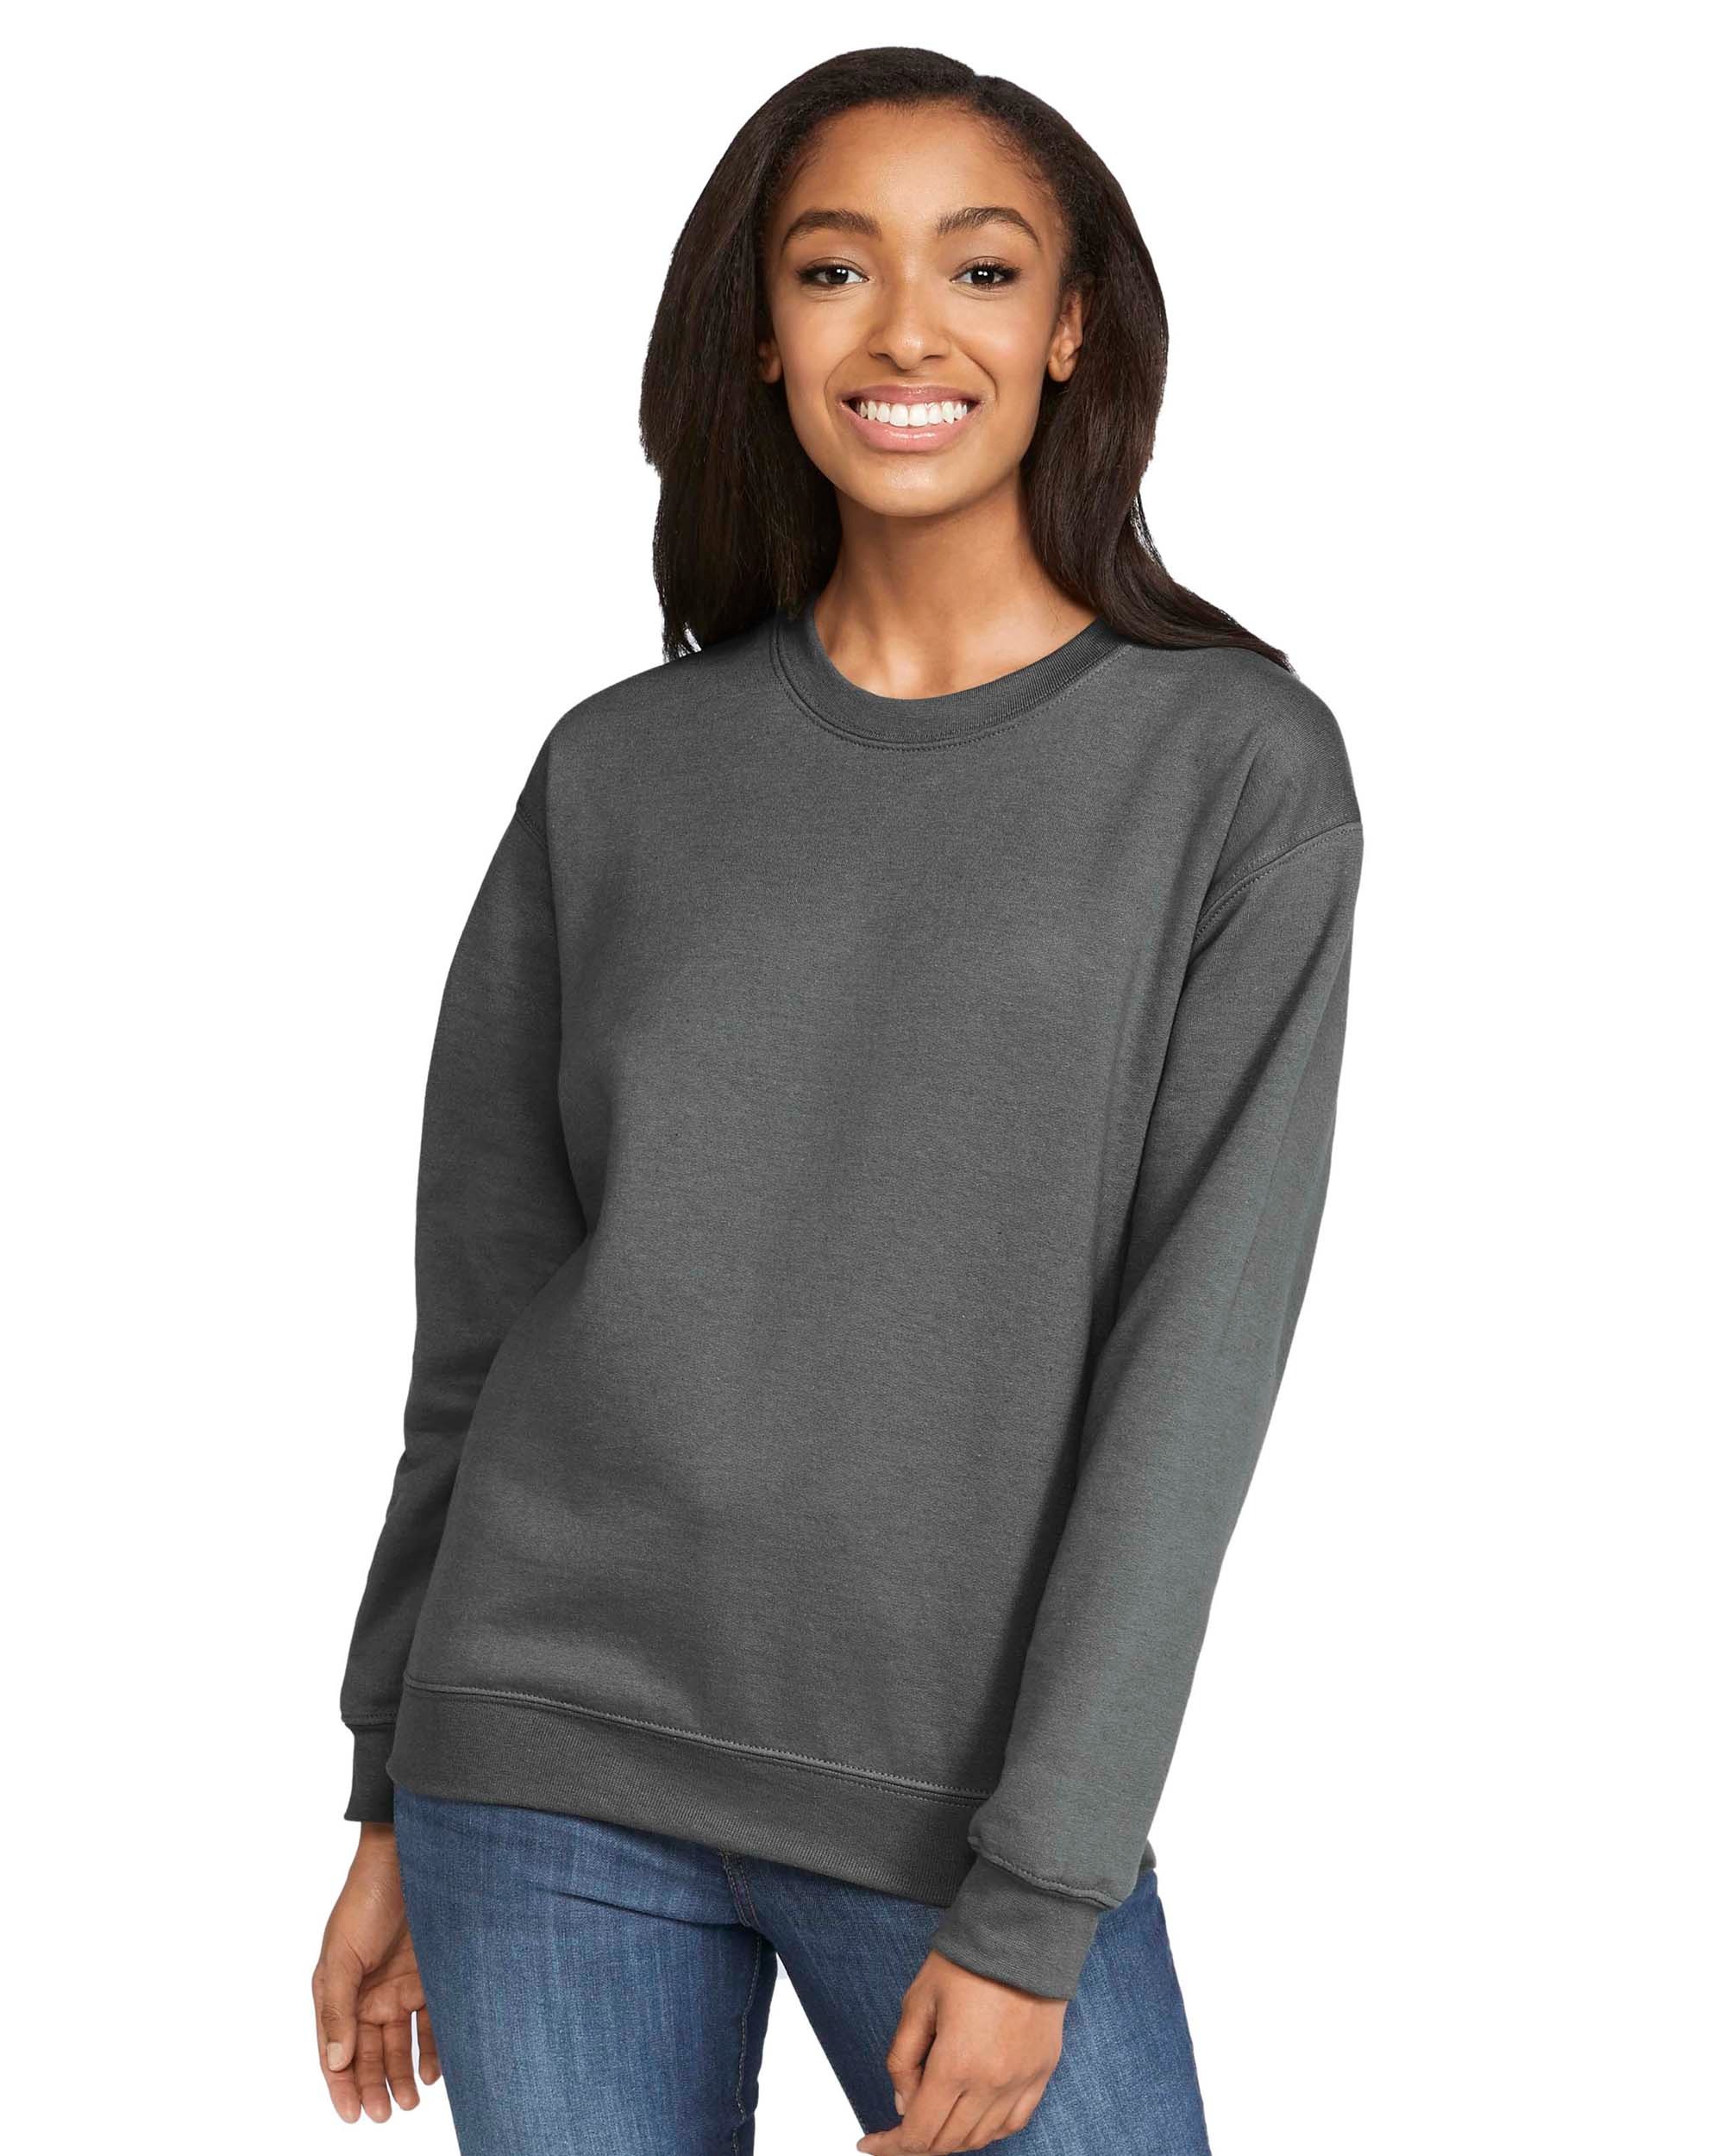 Gildan® SF000 Softstyle® Midweight Fleece Adult Crewneck, shown in Charcoal